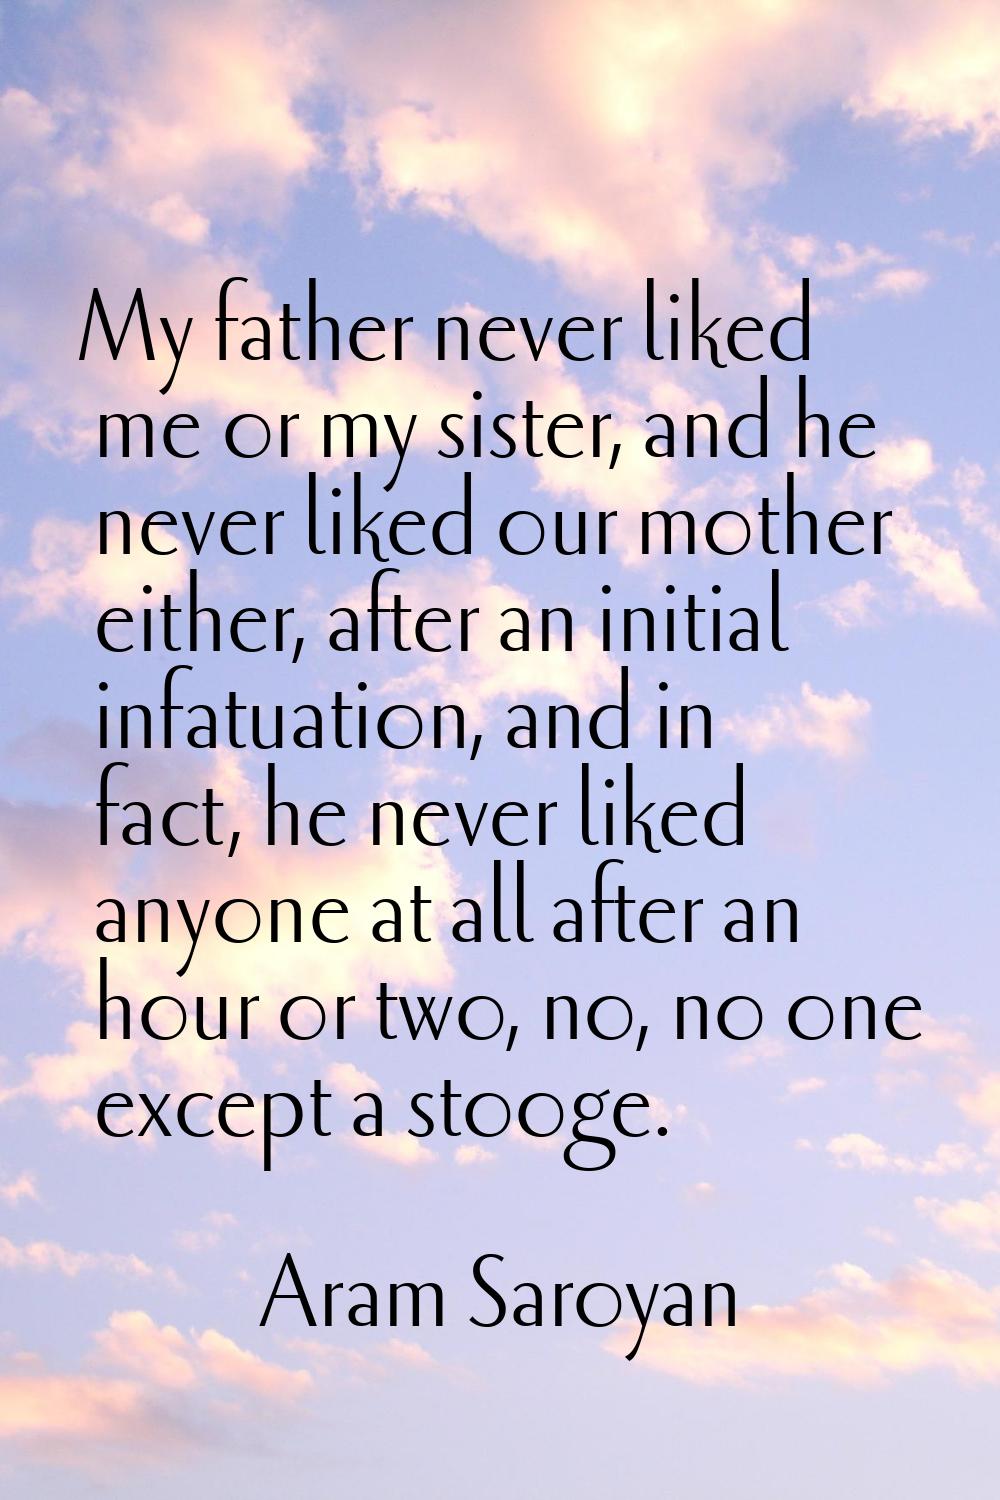 My father never liked me or my sister, and he never liked our mother either, after an initial infat